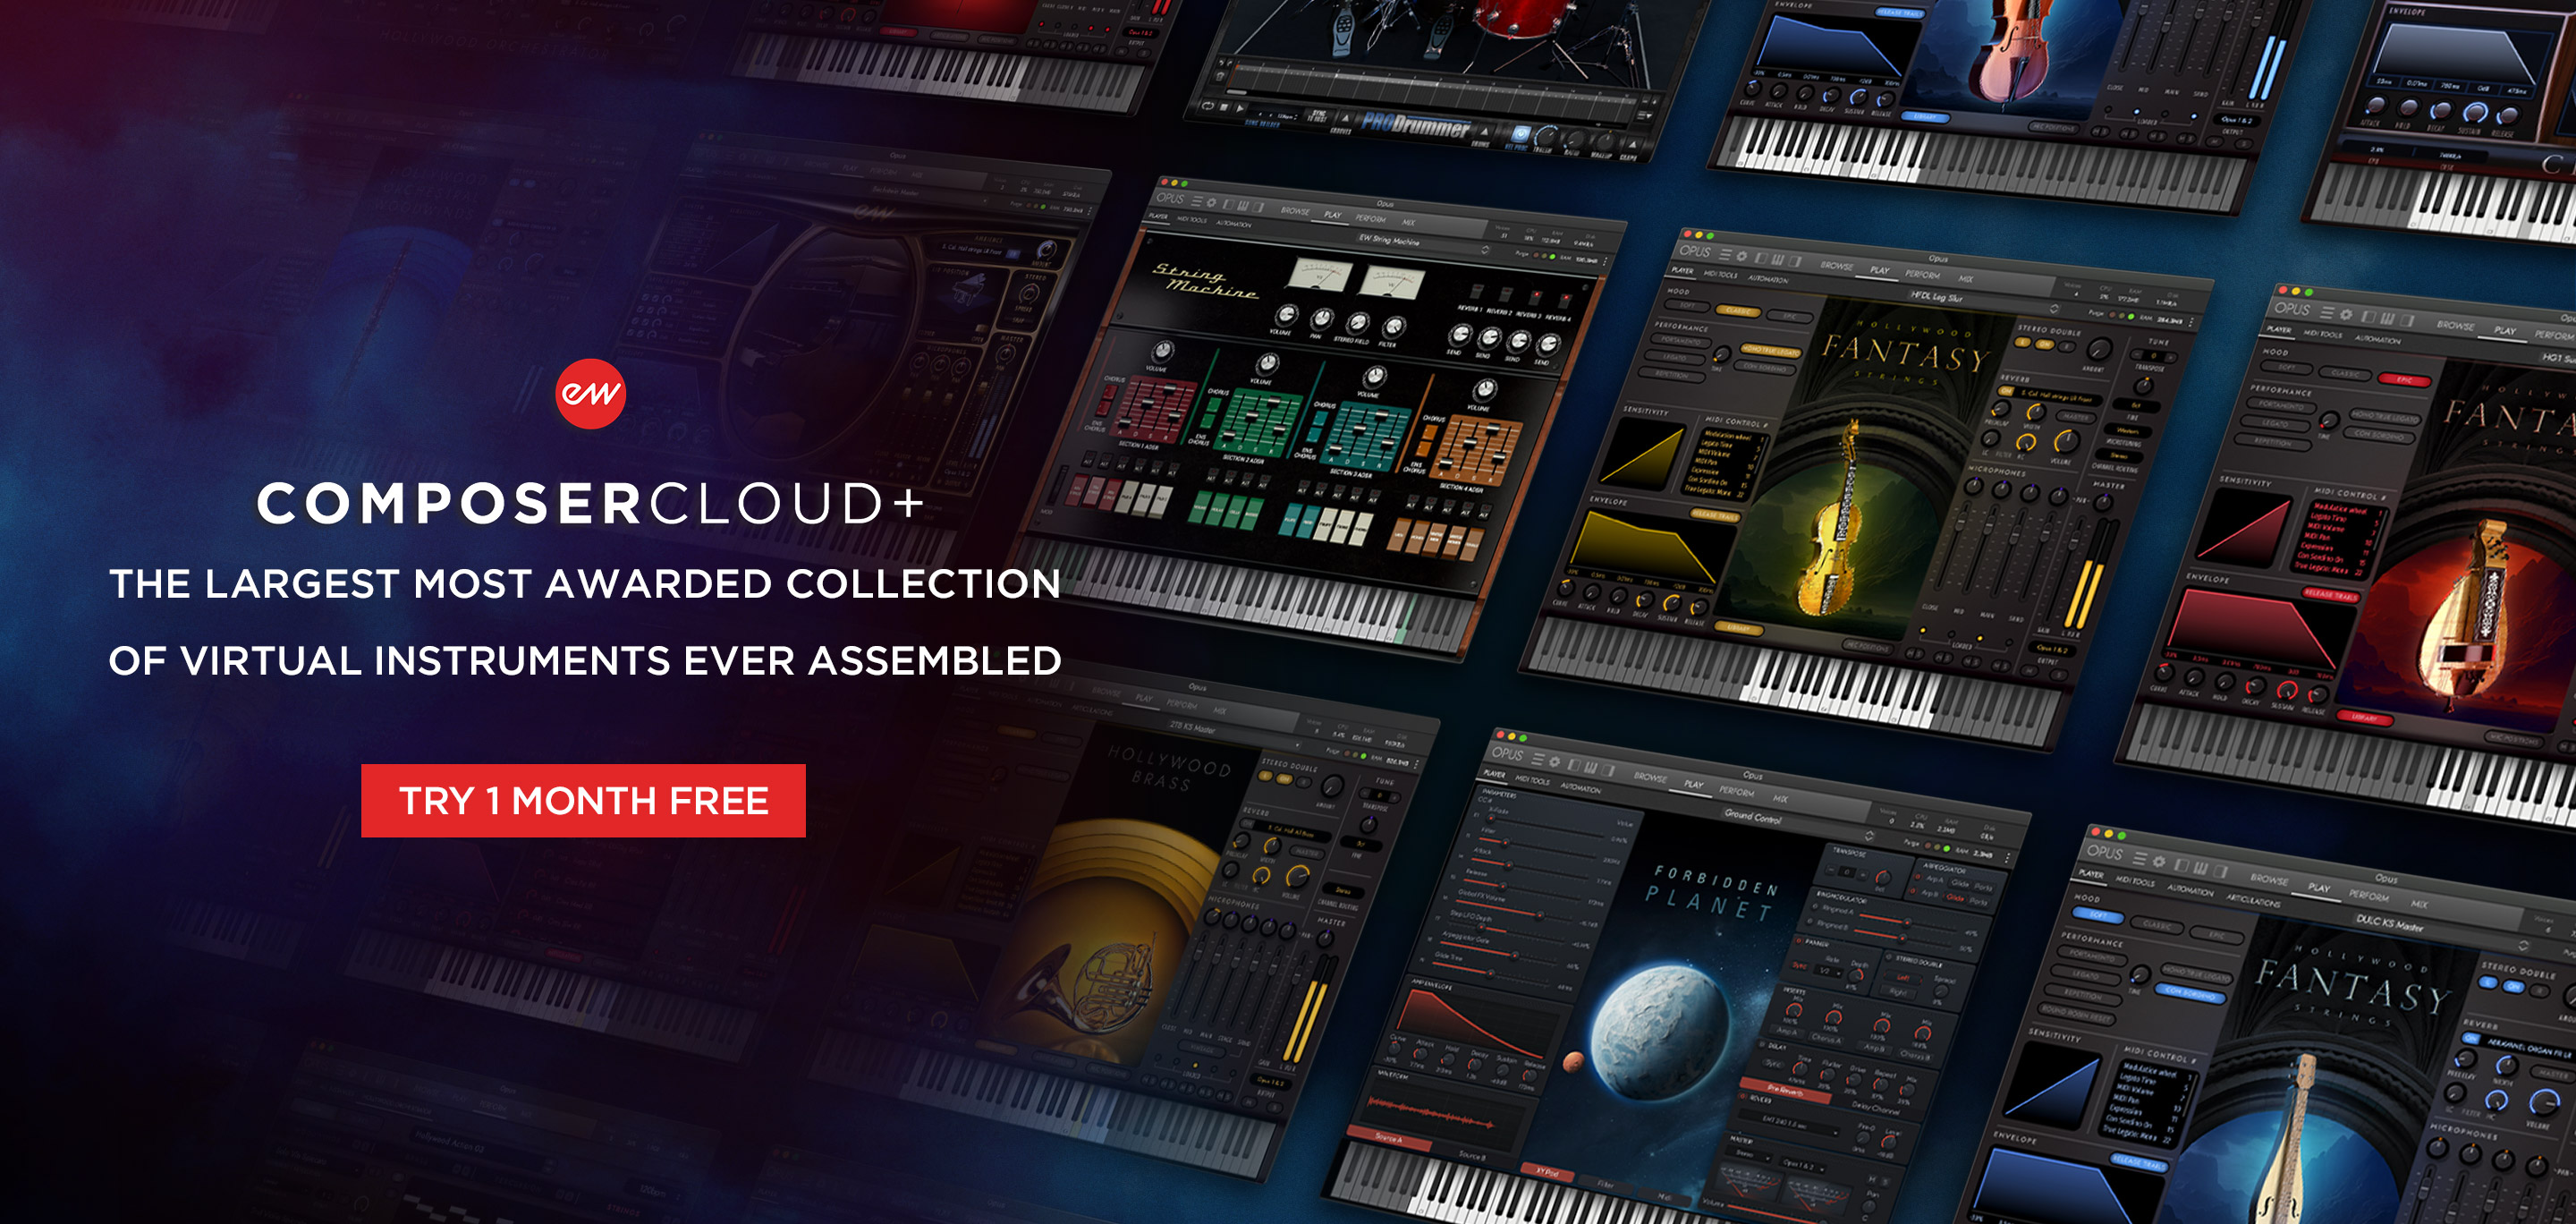 EastWest ComposerCloud+ Download any of our award-winning virtual instruments in seconds - Try 1 Month Free